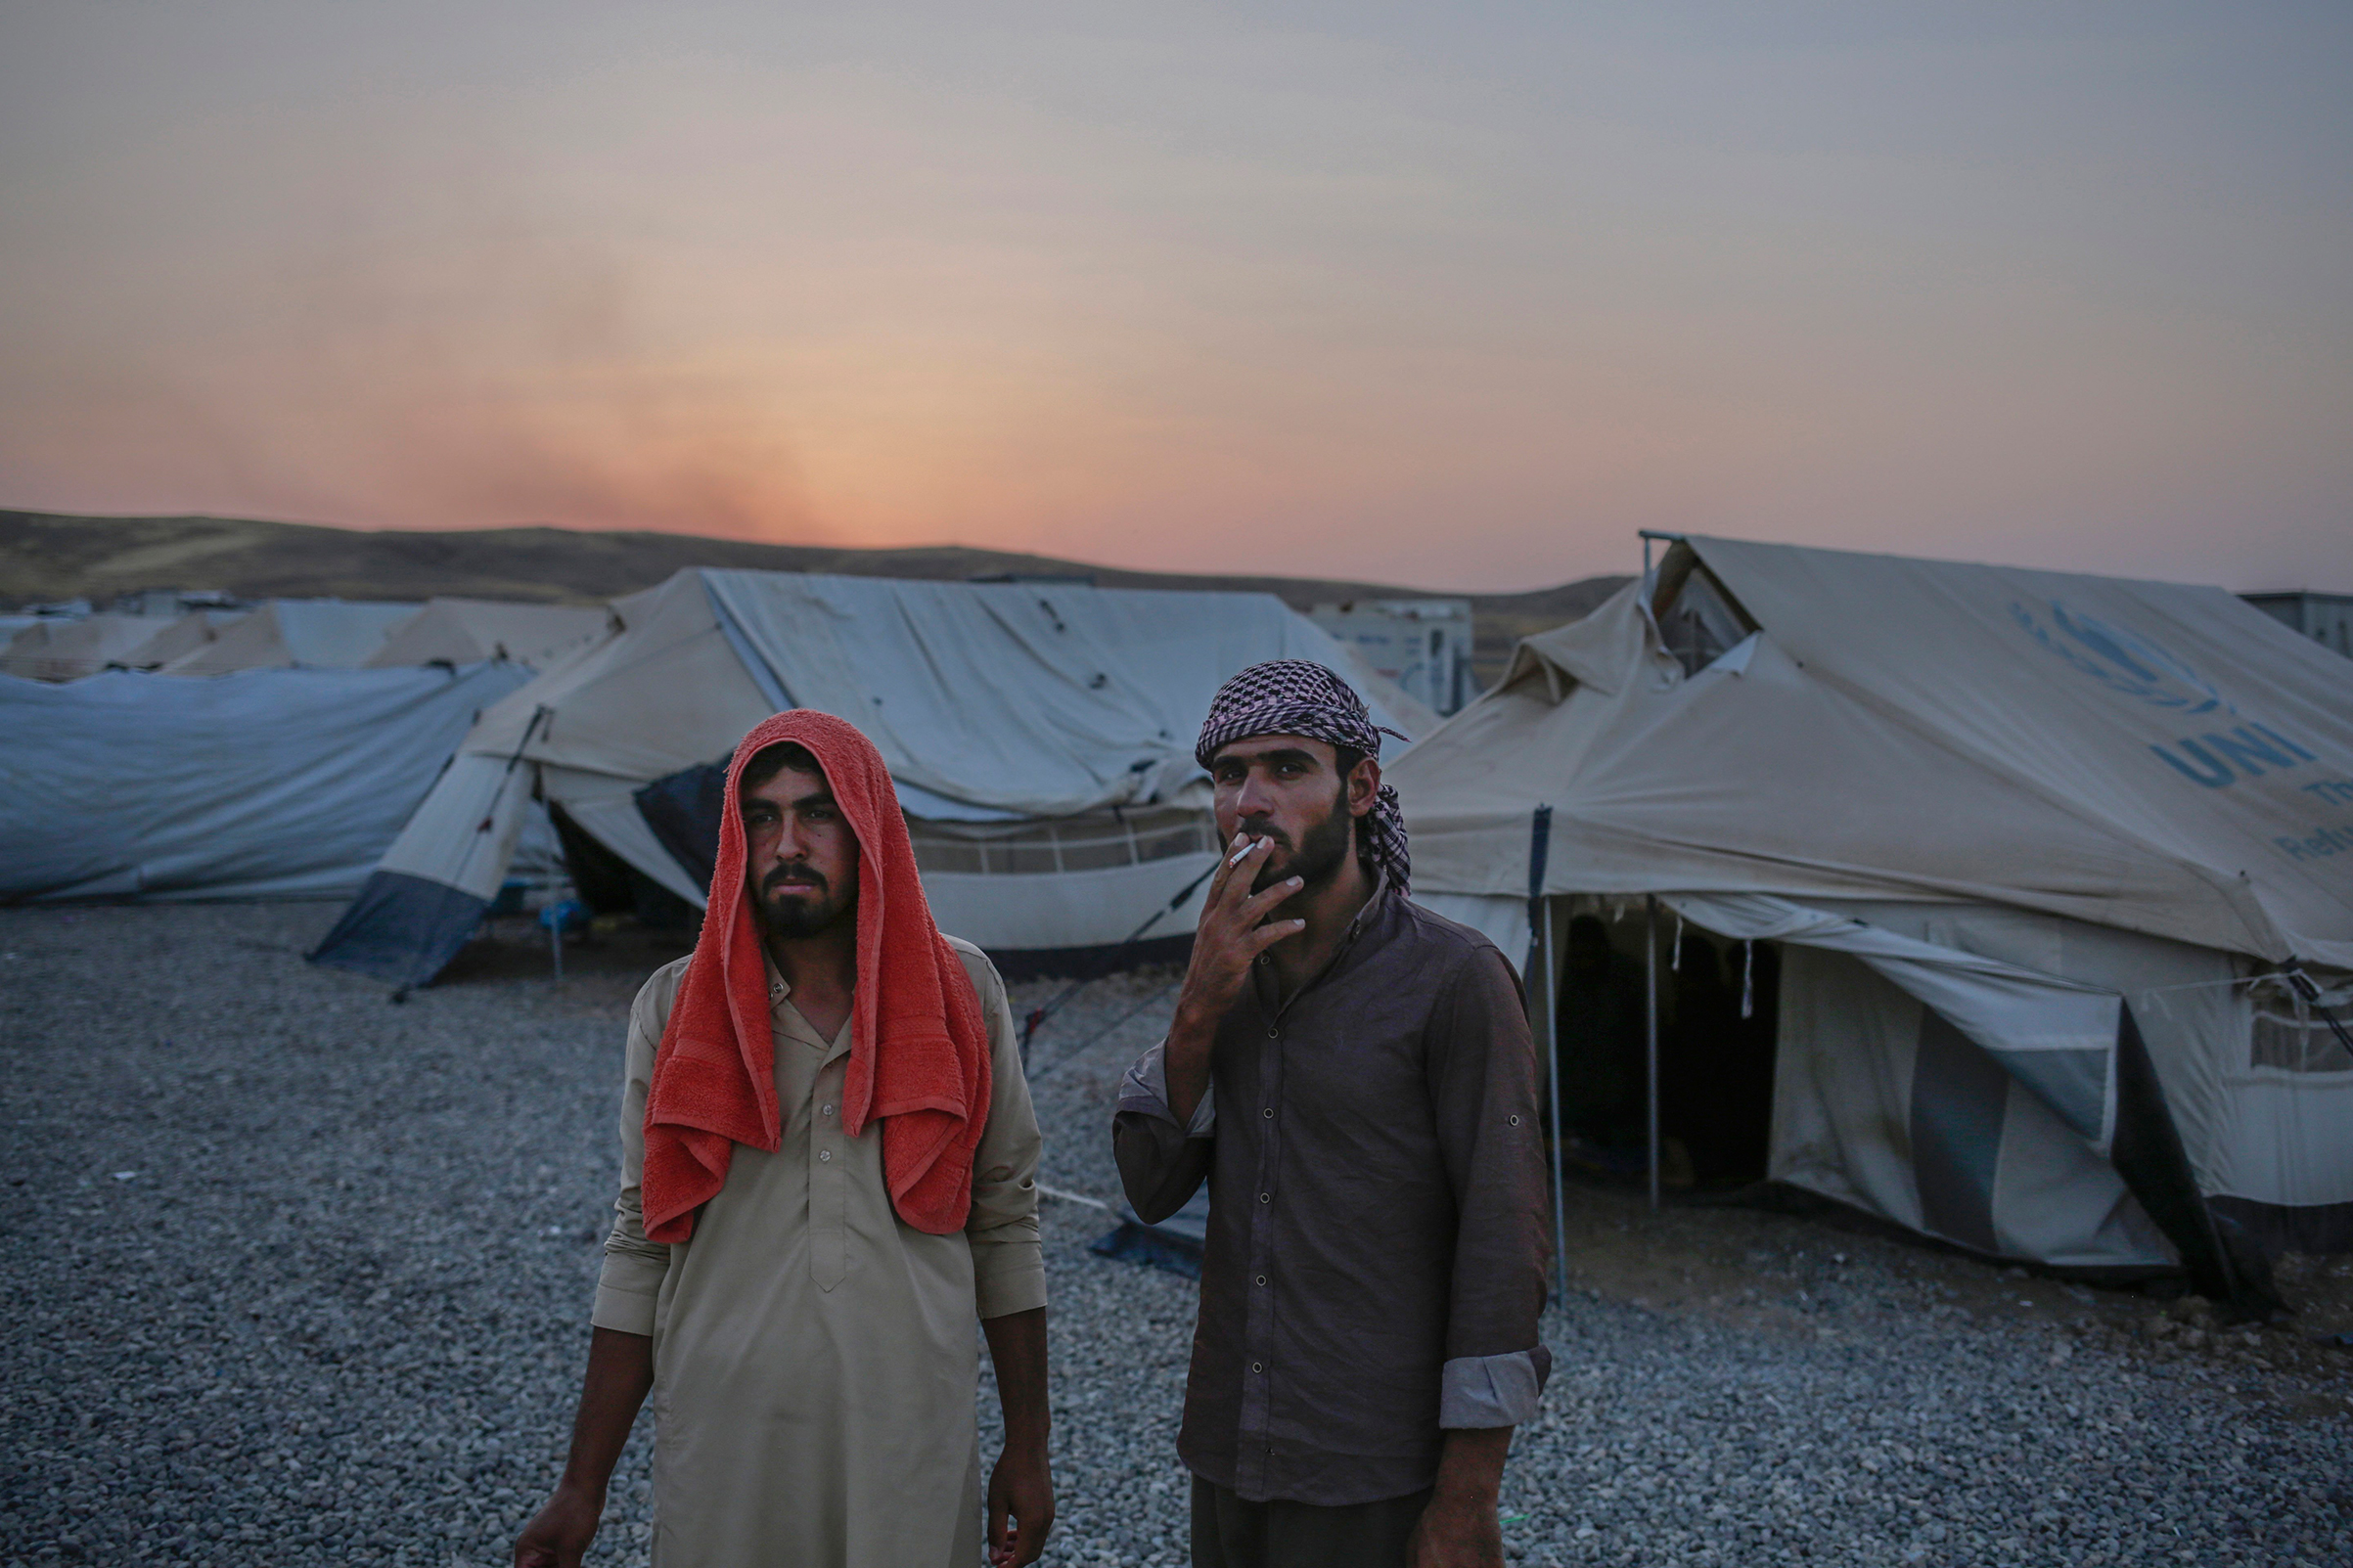 Younes Abdullah, left, and his nephew Rakan Hamid Jasim stand inside the Chamakor camp for displaced people in Northern Iraq. They both want to return to their homes in the town of Zummar, currently under Kurdish control, but Kurdish security forces don't allow them to return. The two relatives lived under Islamic State rule for almost three years. (Bram Janssen—AP)